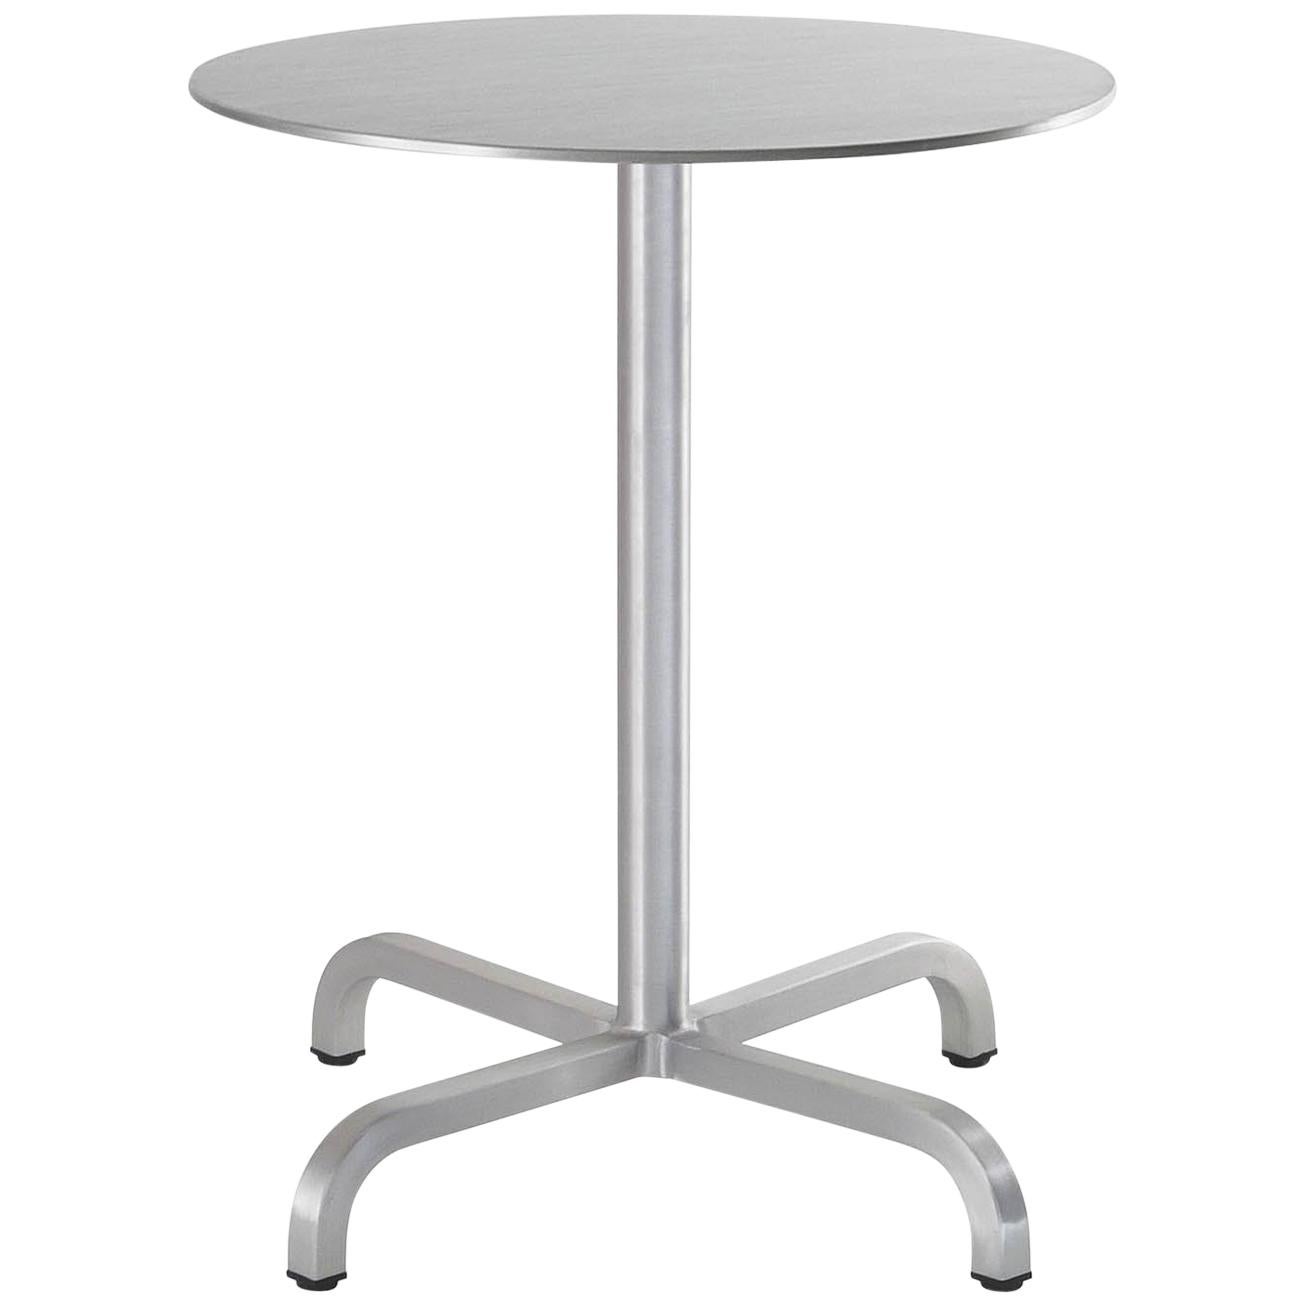 Emeco 20-06 Small Round Café Table in Brushed Aluminium by Norman Foster For Sale